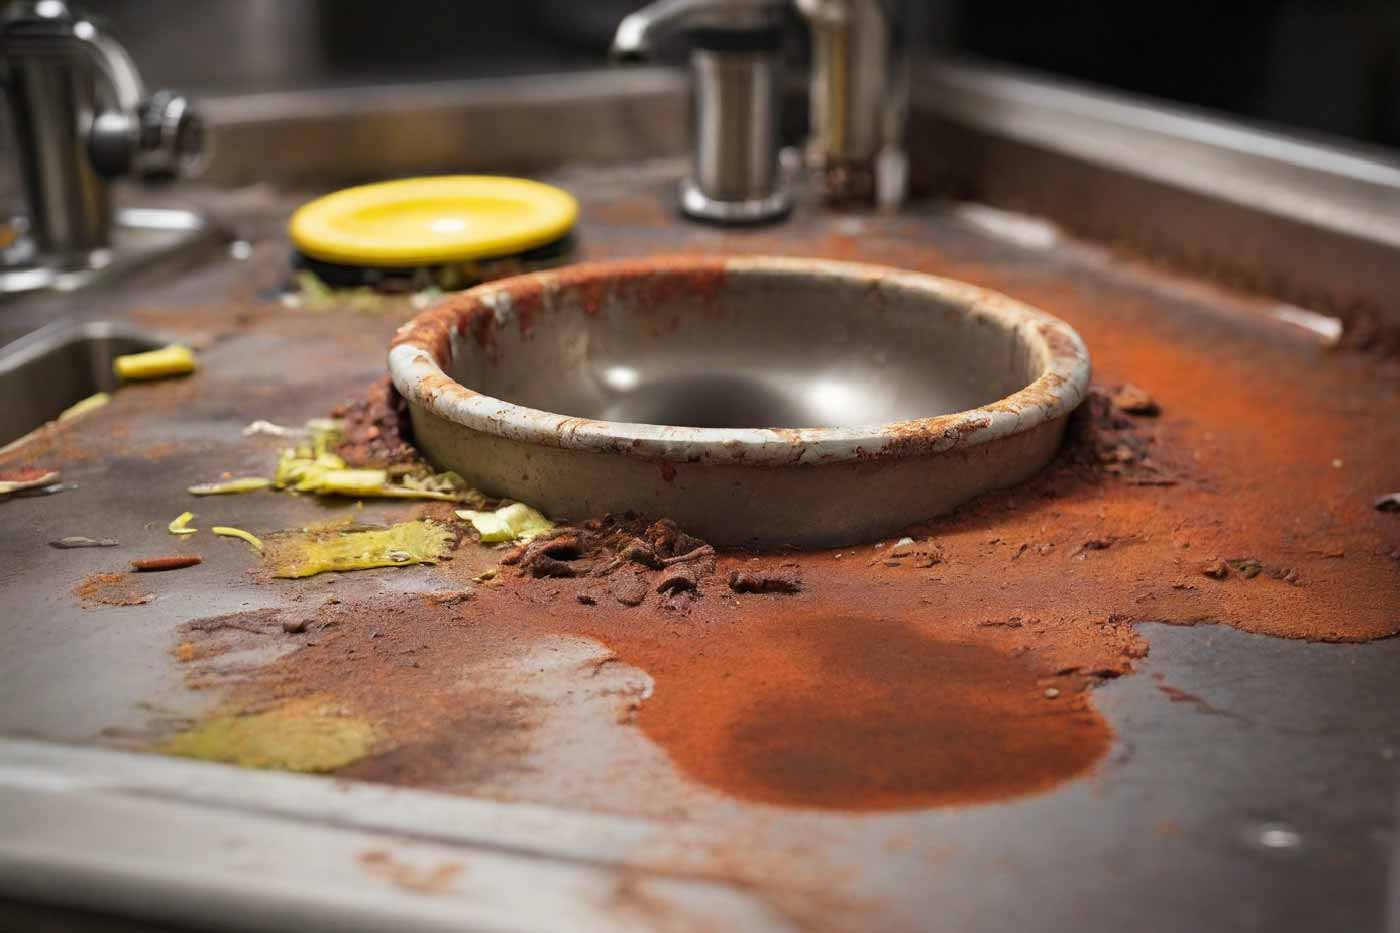 How To Remove Rust From Garbage Disposal